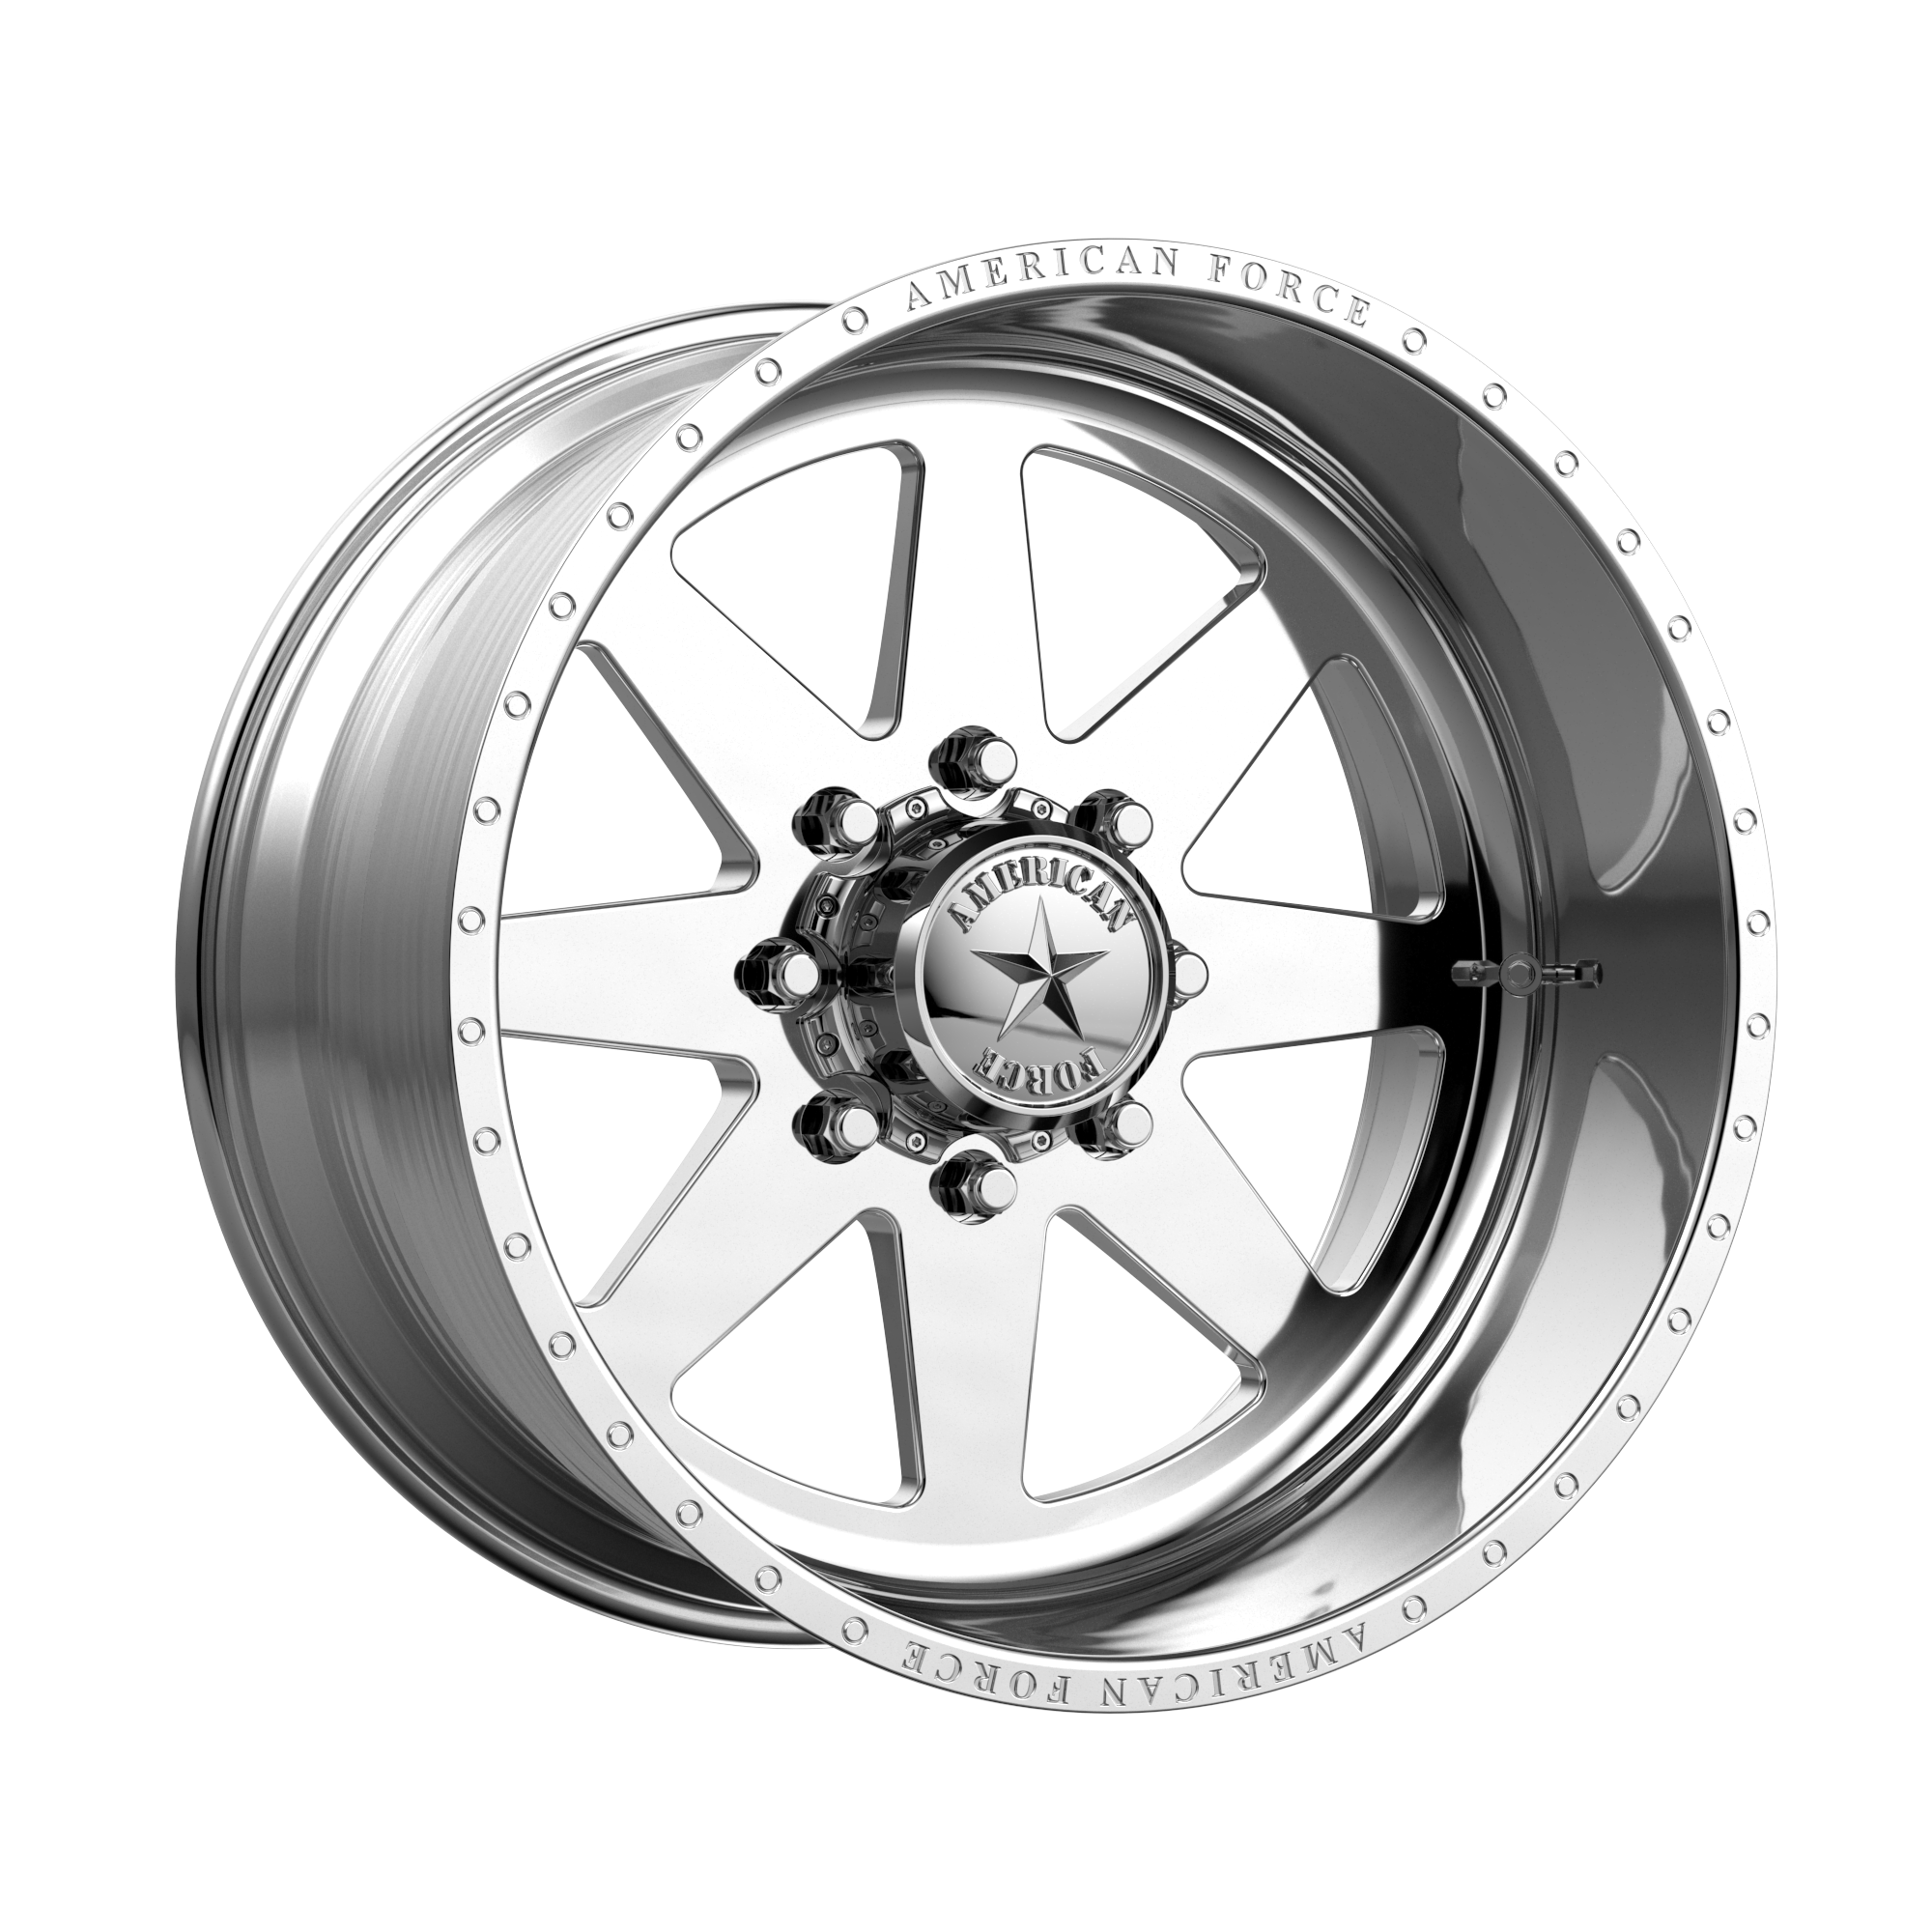 INDEPENDENCE SS 22x16 8x180.00 POLISHED (-101 mm) - Tires and Engine Performance